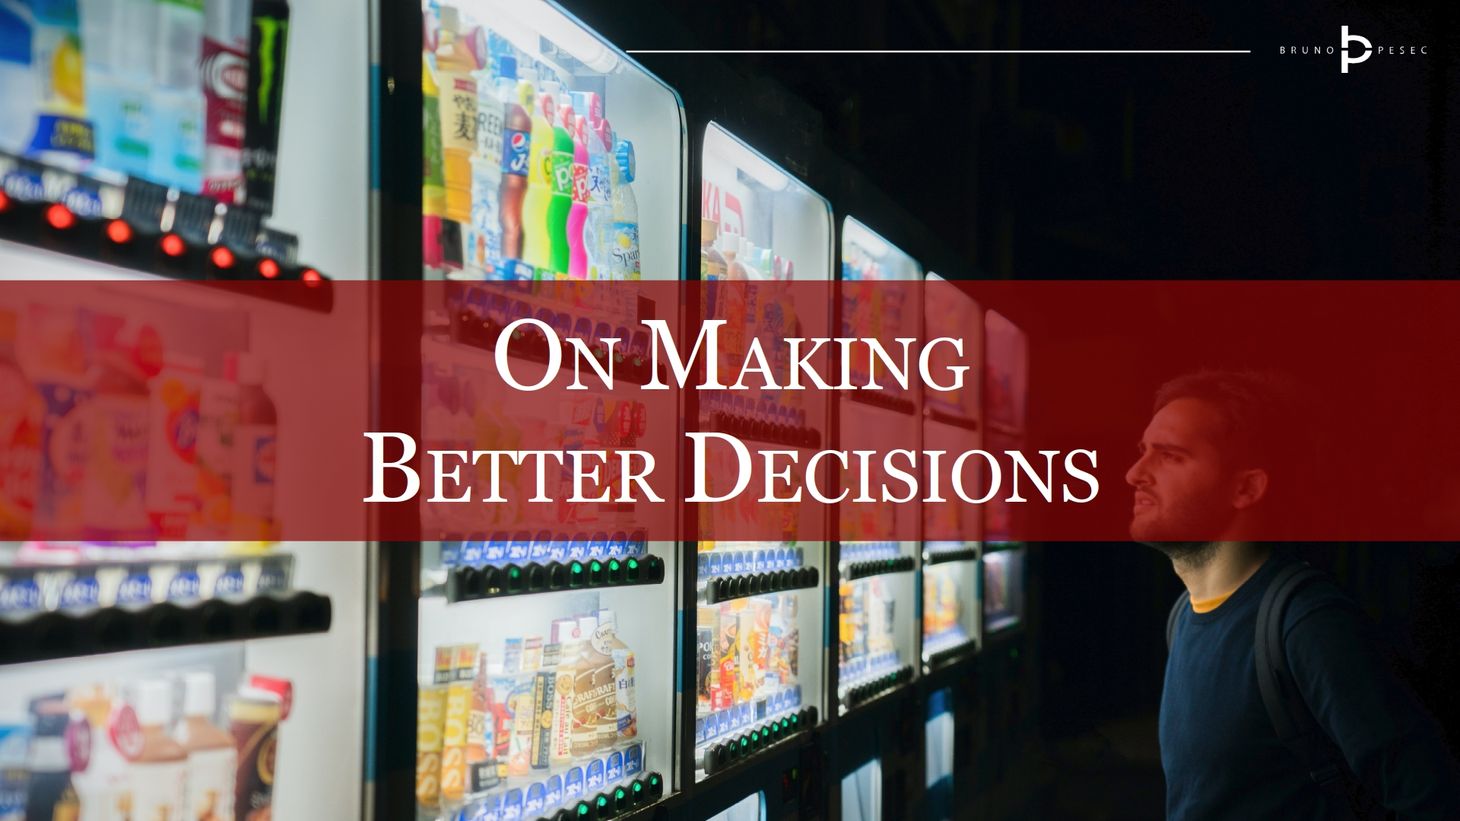 On making better decisions